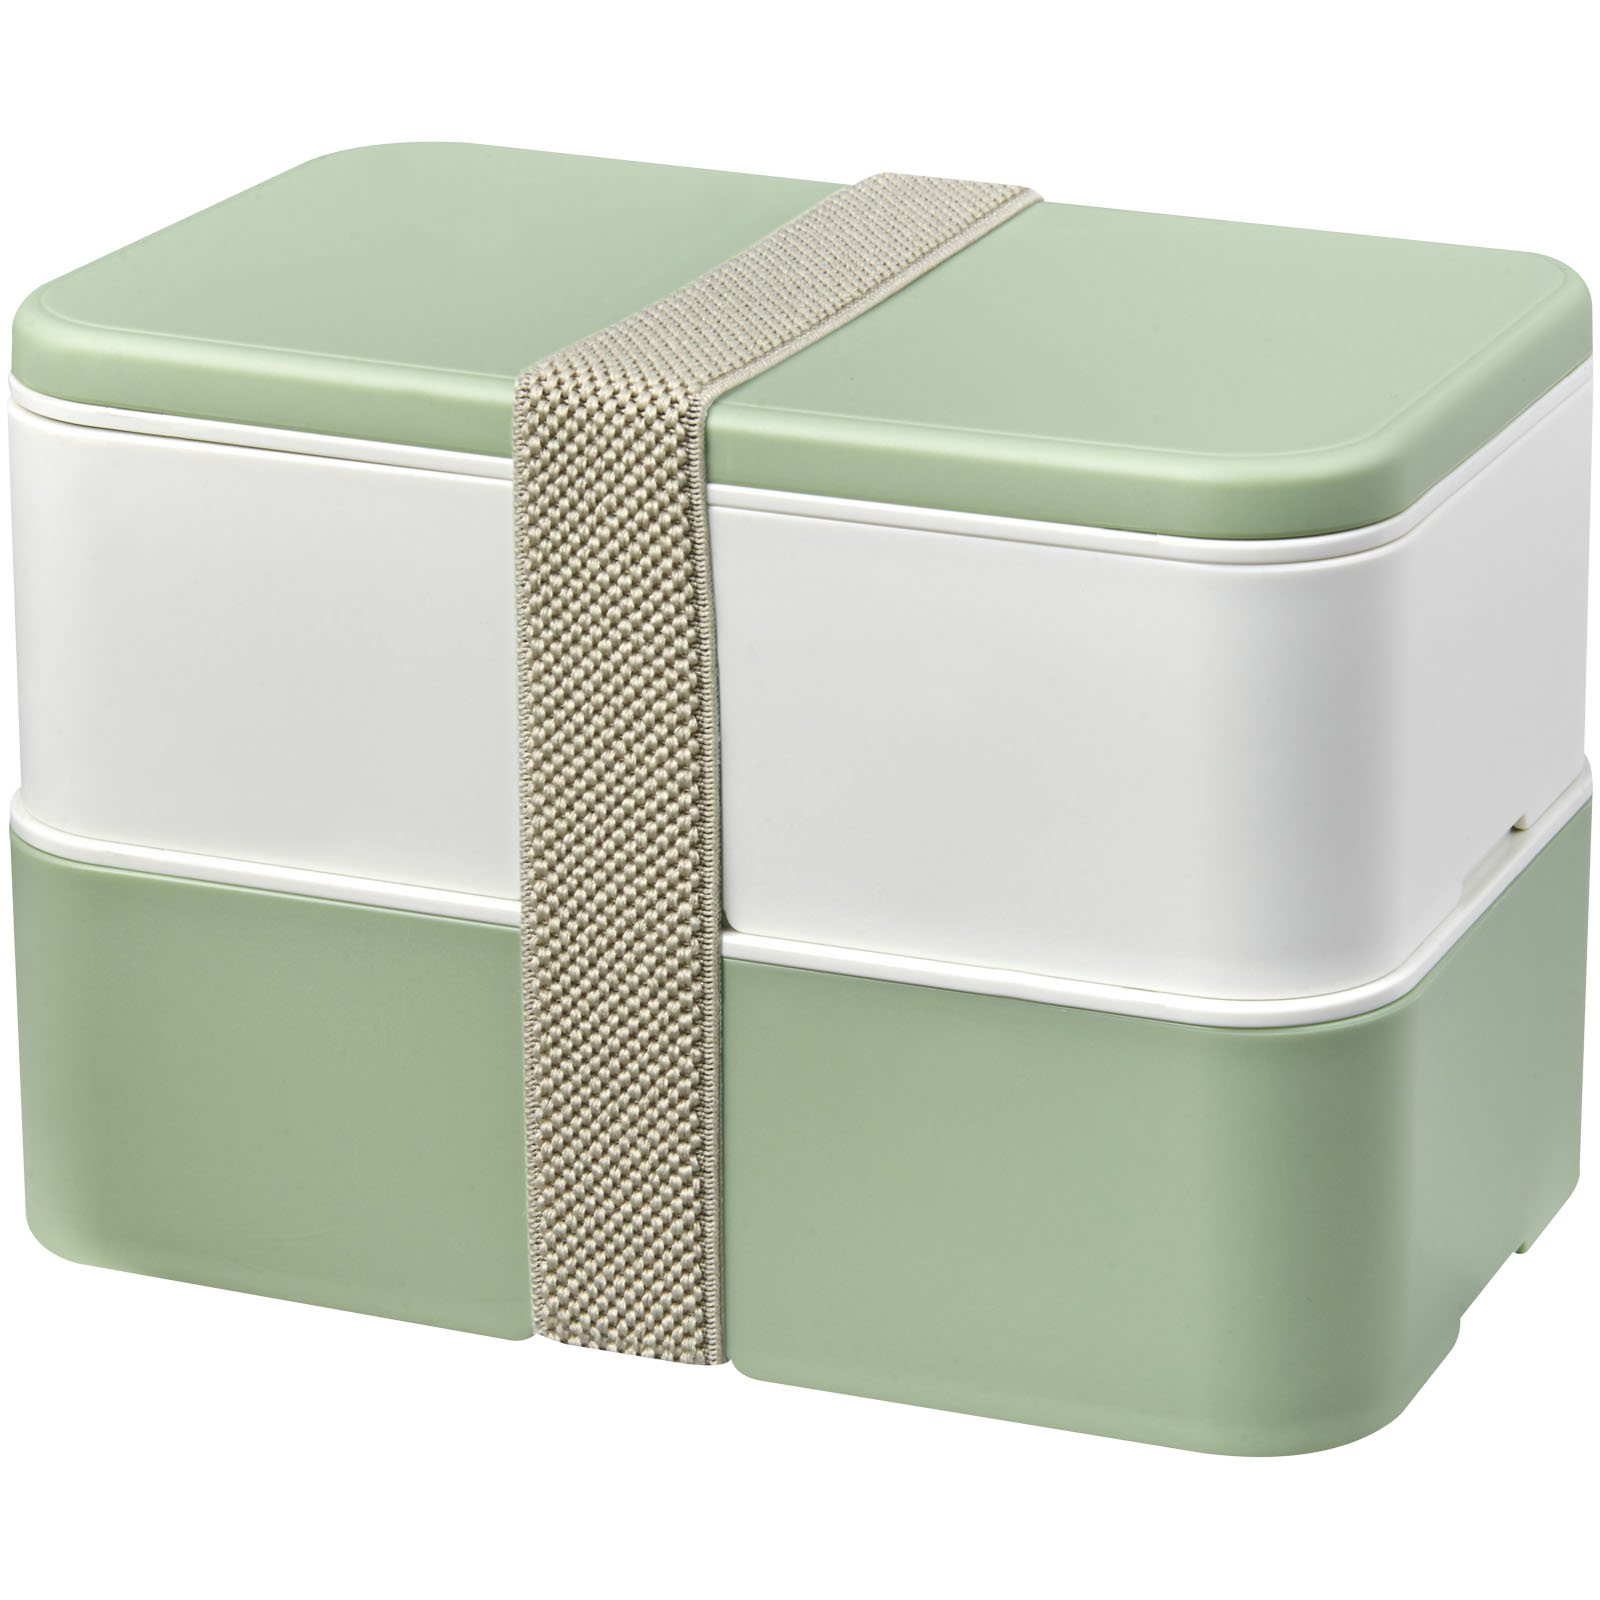 Advertising Lunch Boxes - MIYO Renew double layer lunch box - 0